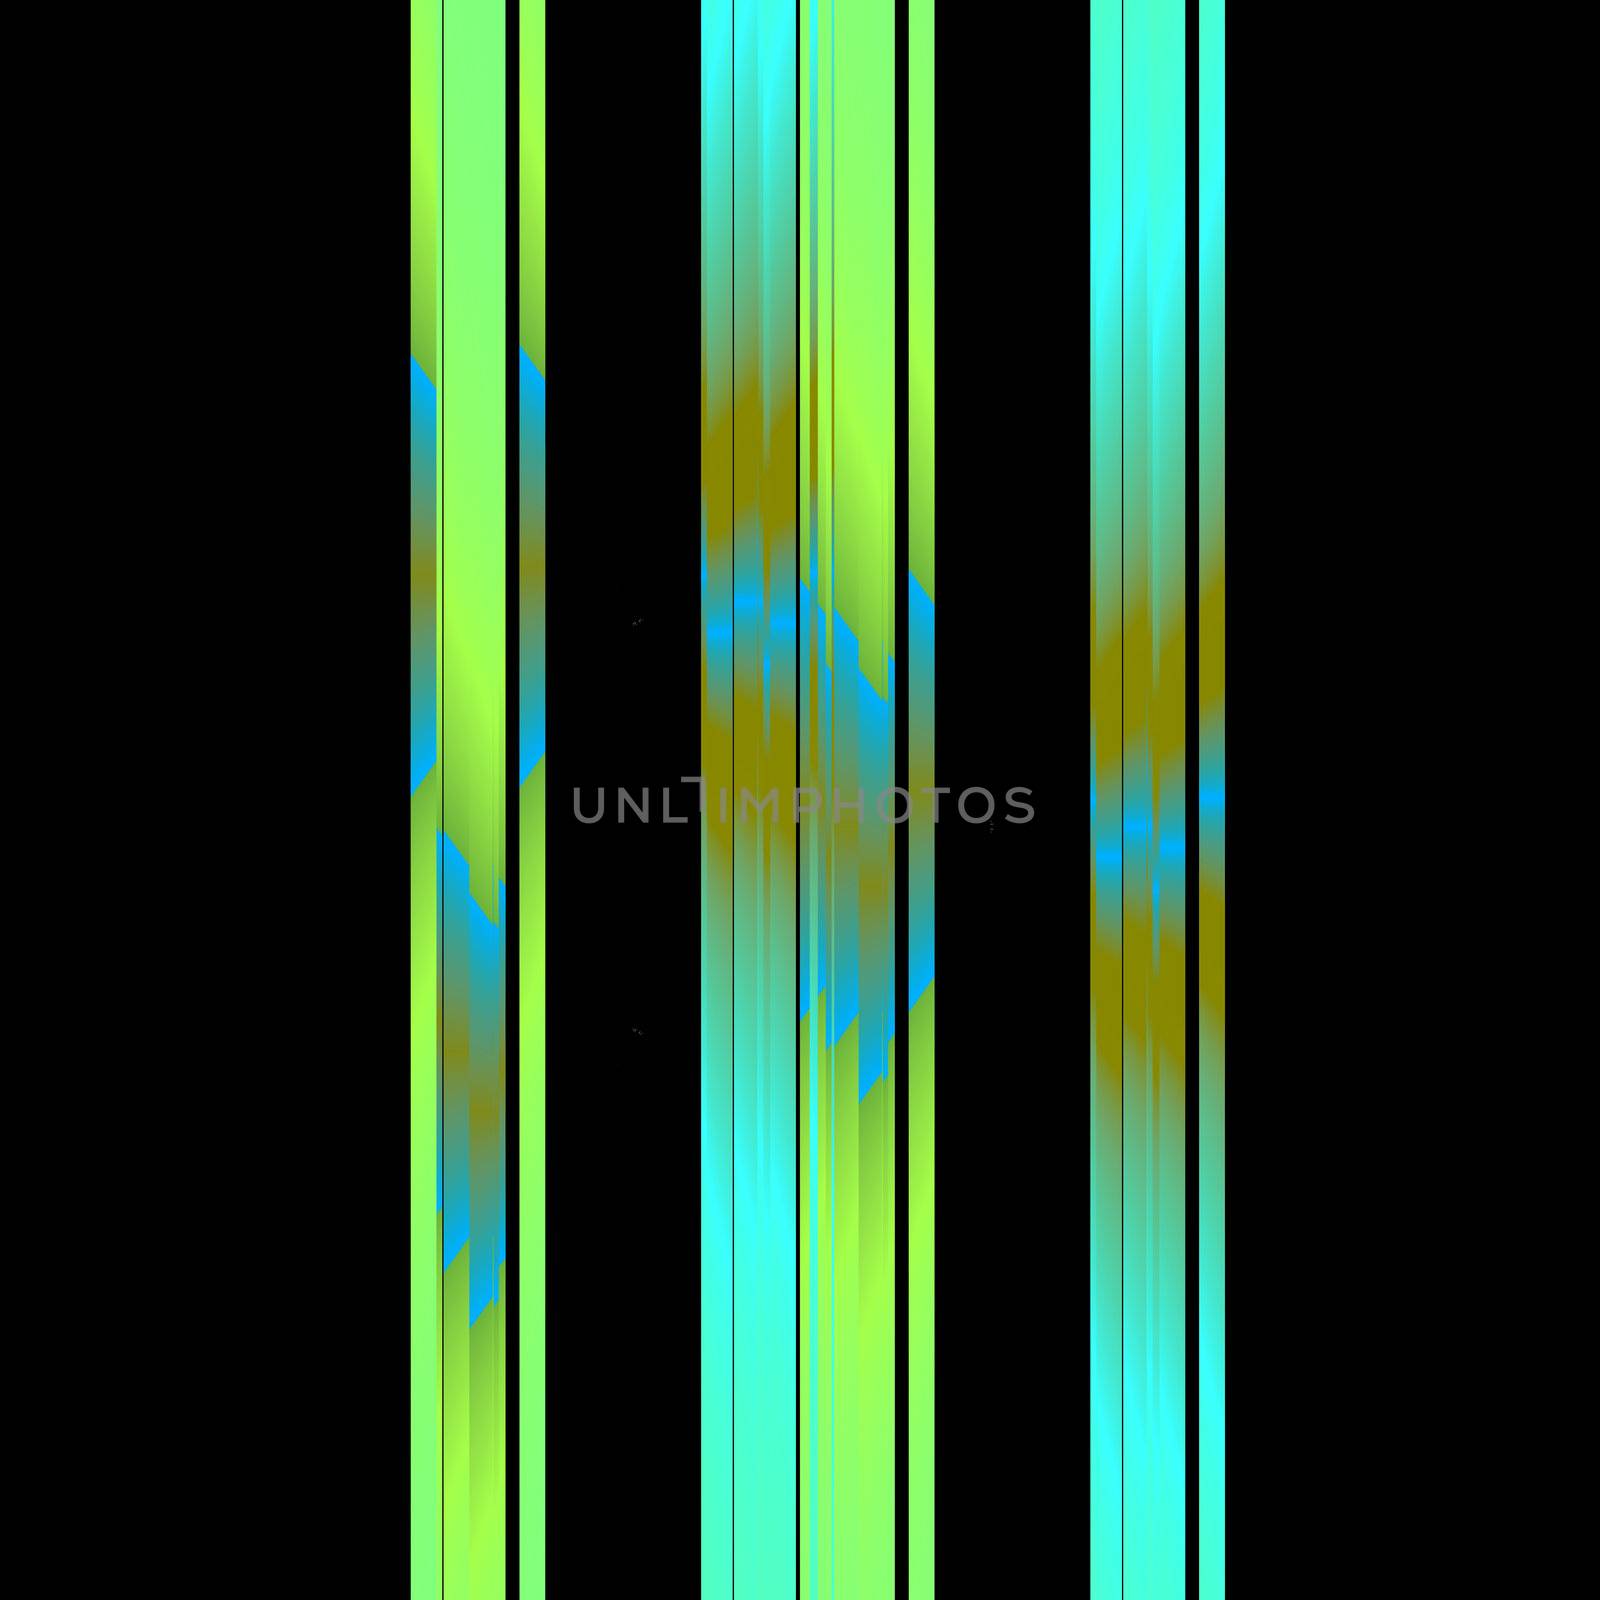 An abstract image with vertical stripes in shades of green.